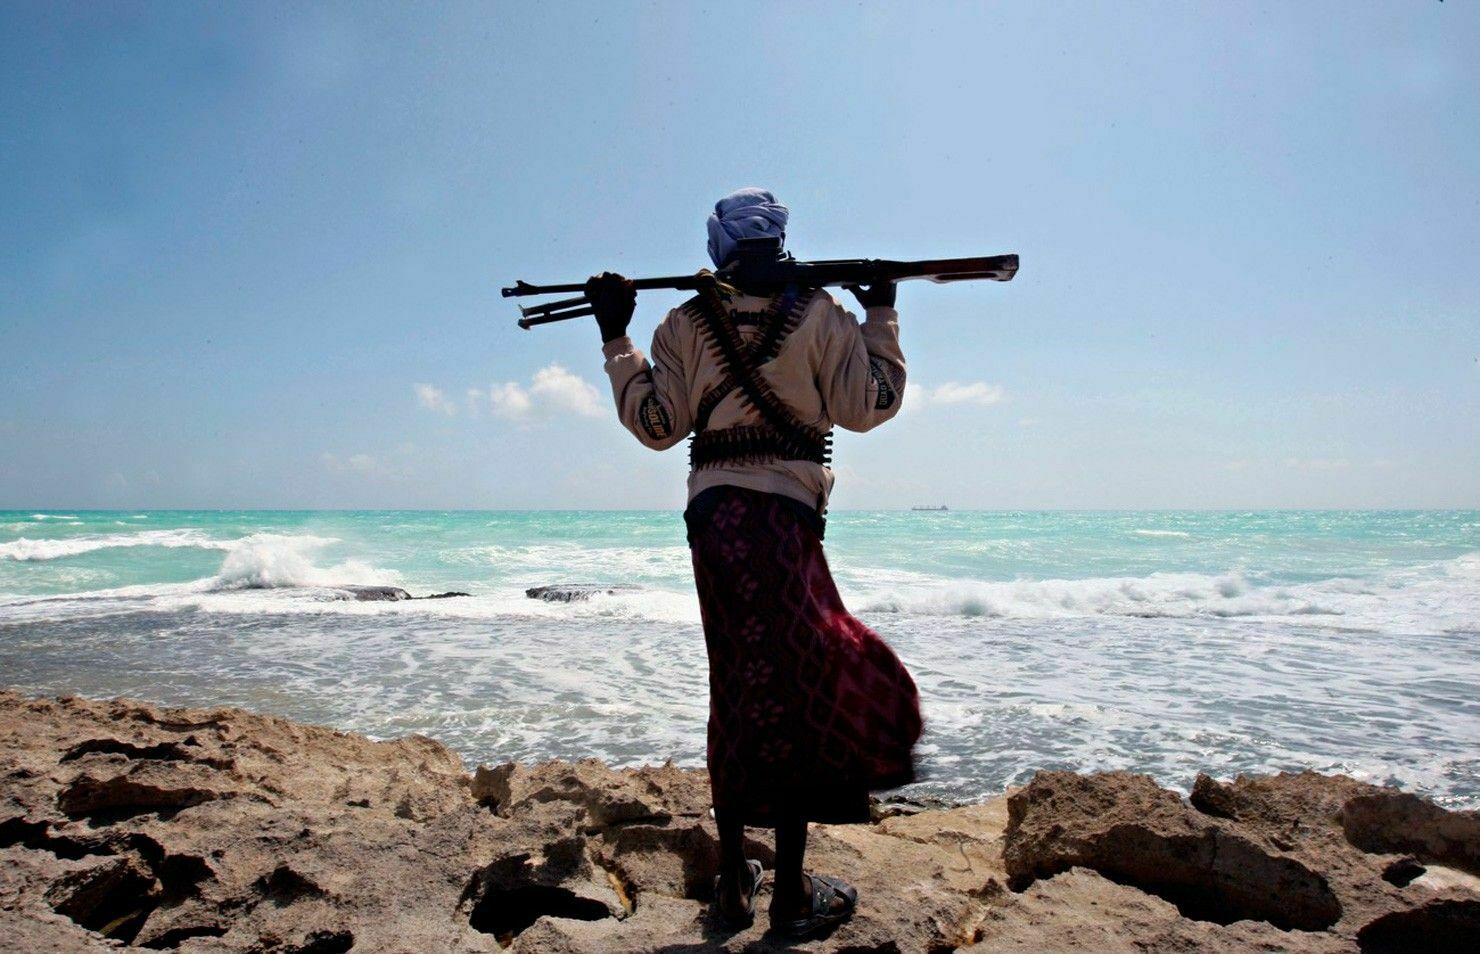 Pirates attacked Russian sailors near the coast of Africa